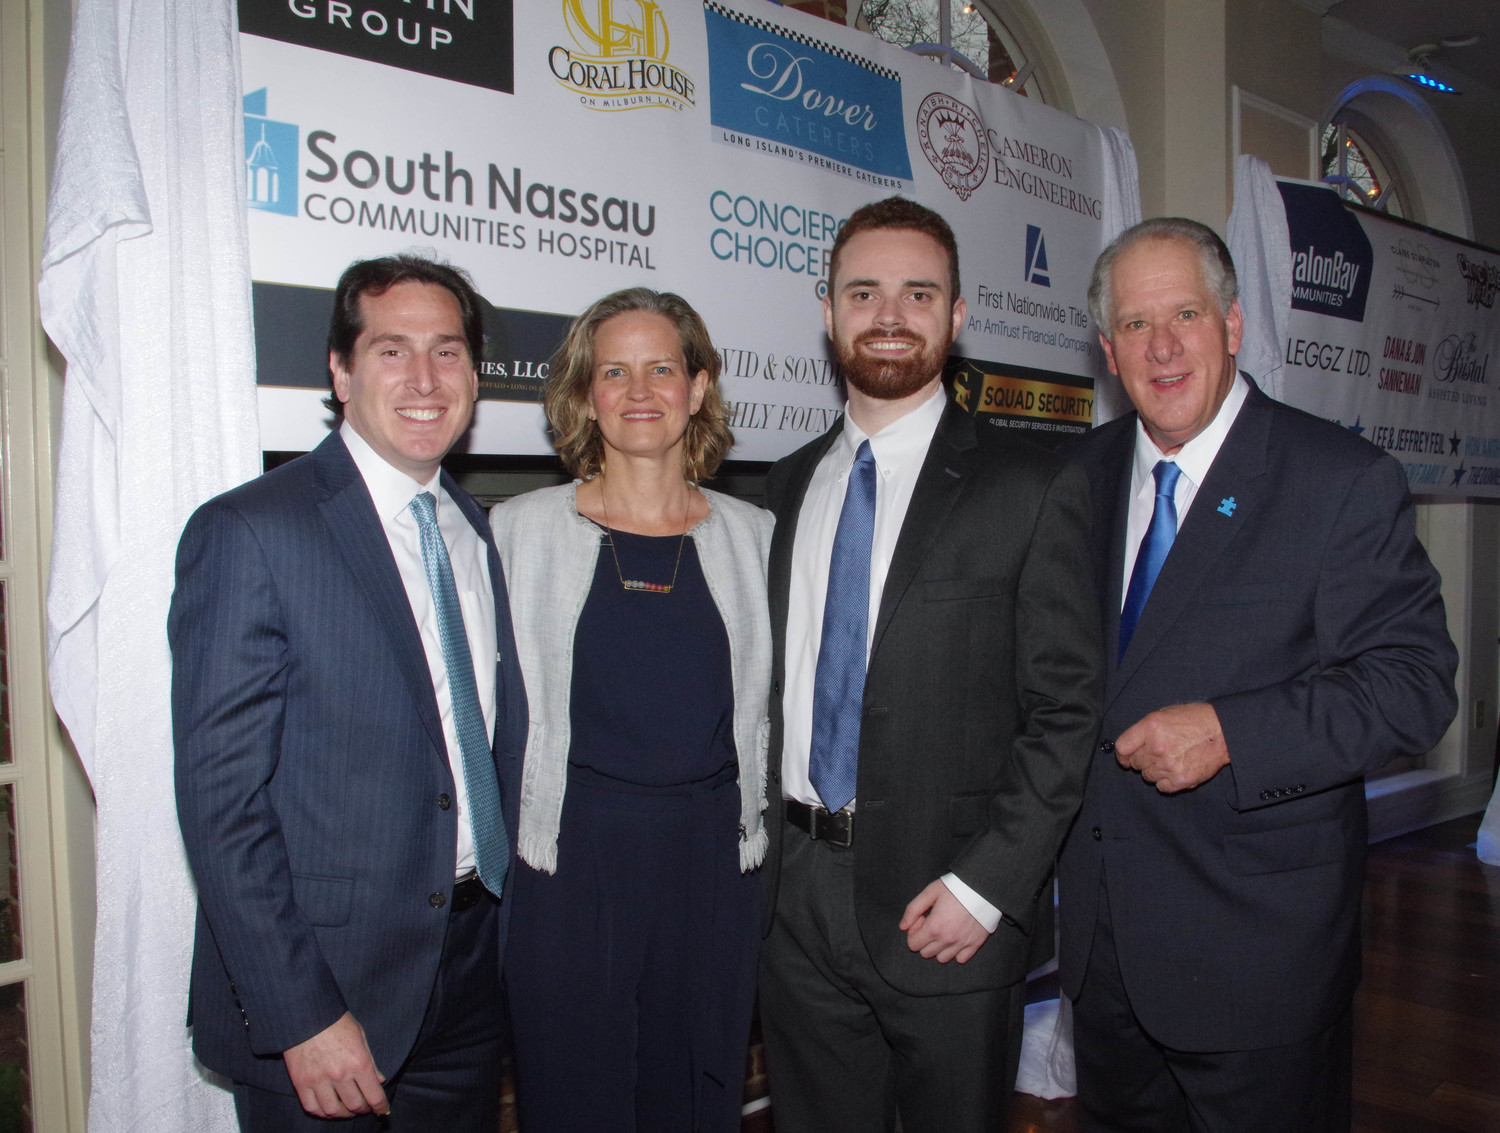 State Sen. Todd Kaminsky, left, Nassau County Executive Laura Curran, resident Sean Culkin, who was presented with the Courage Award and Tony Cancellieri, co-founder of RVC Blue Speaks.